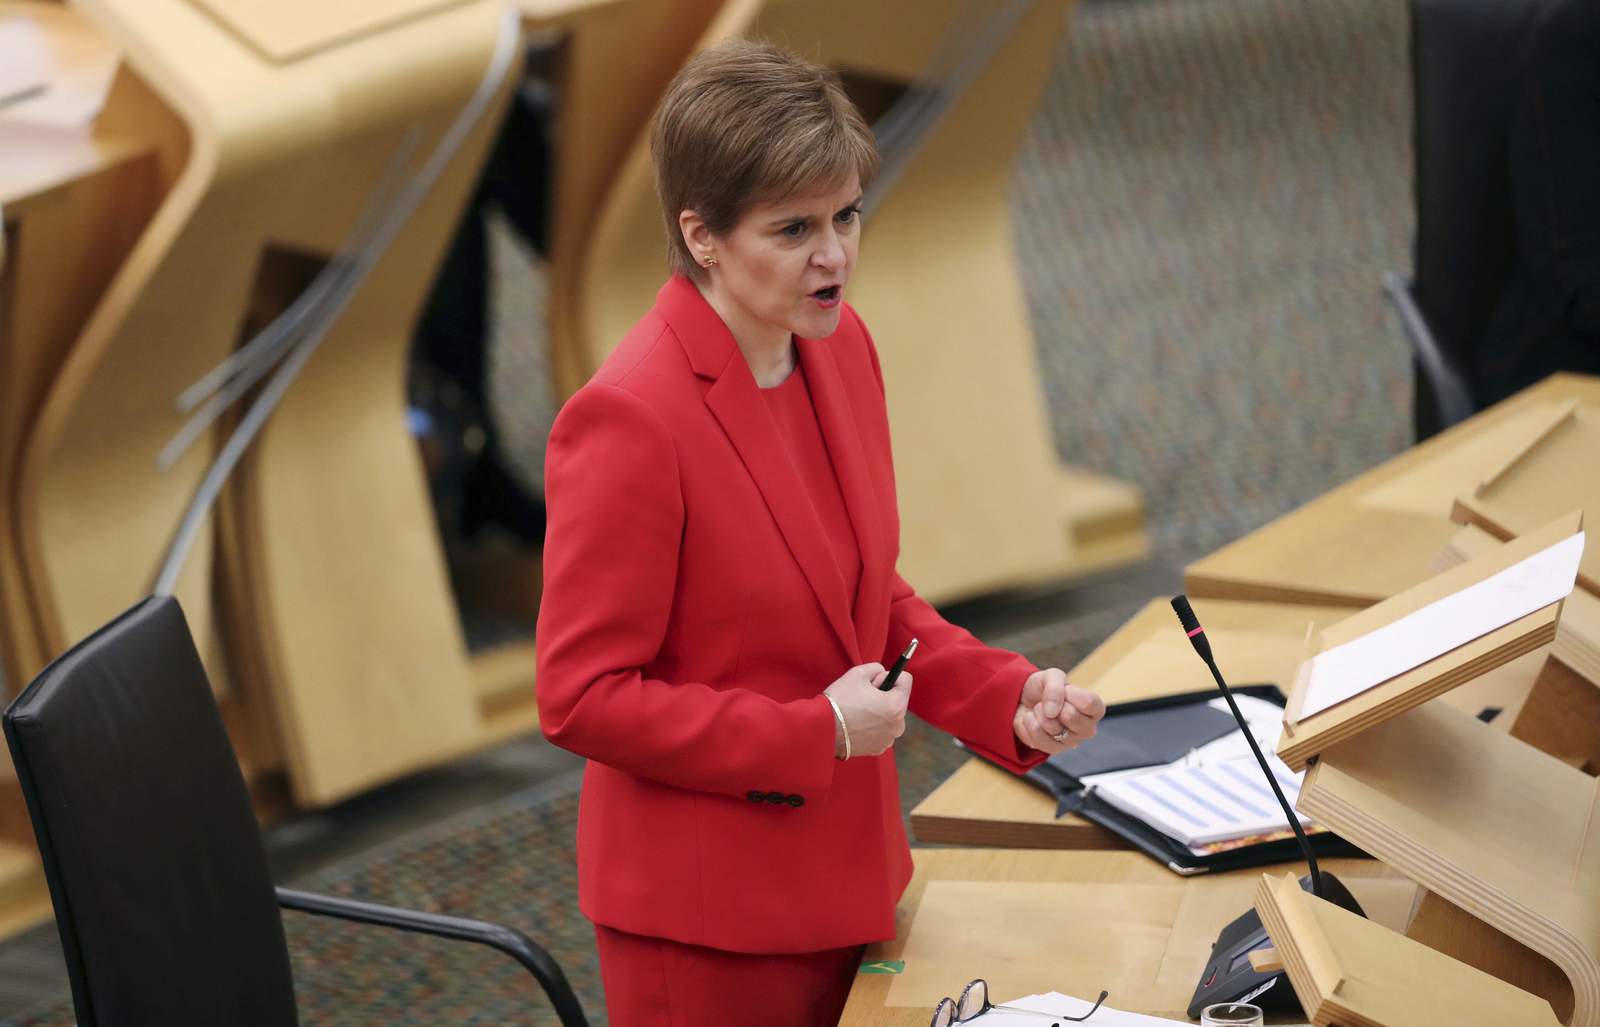 Scottish leader Sturgeon sorry for breaking COVID-19 rules